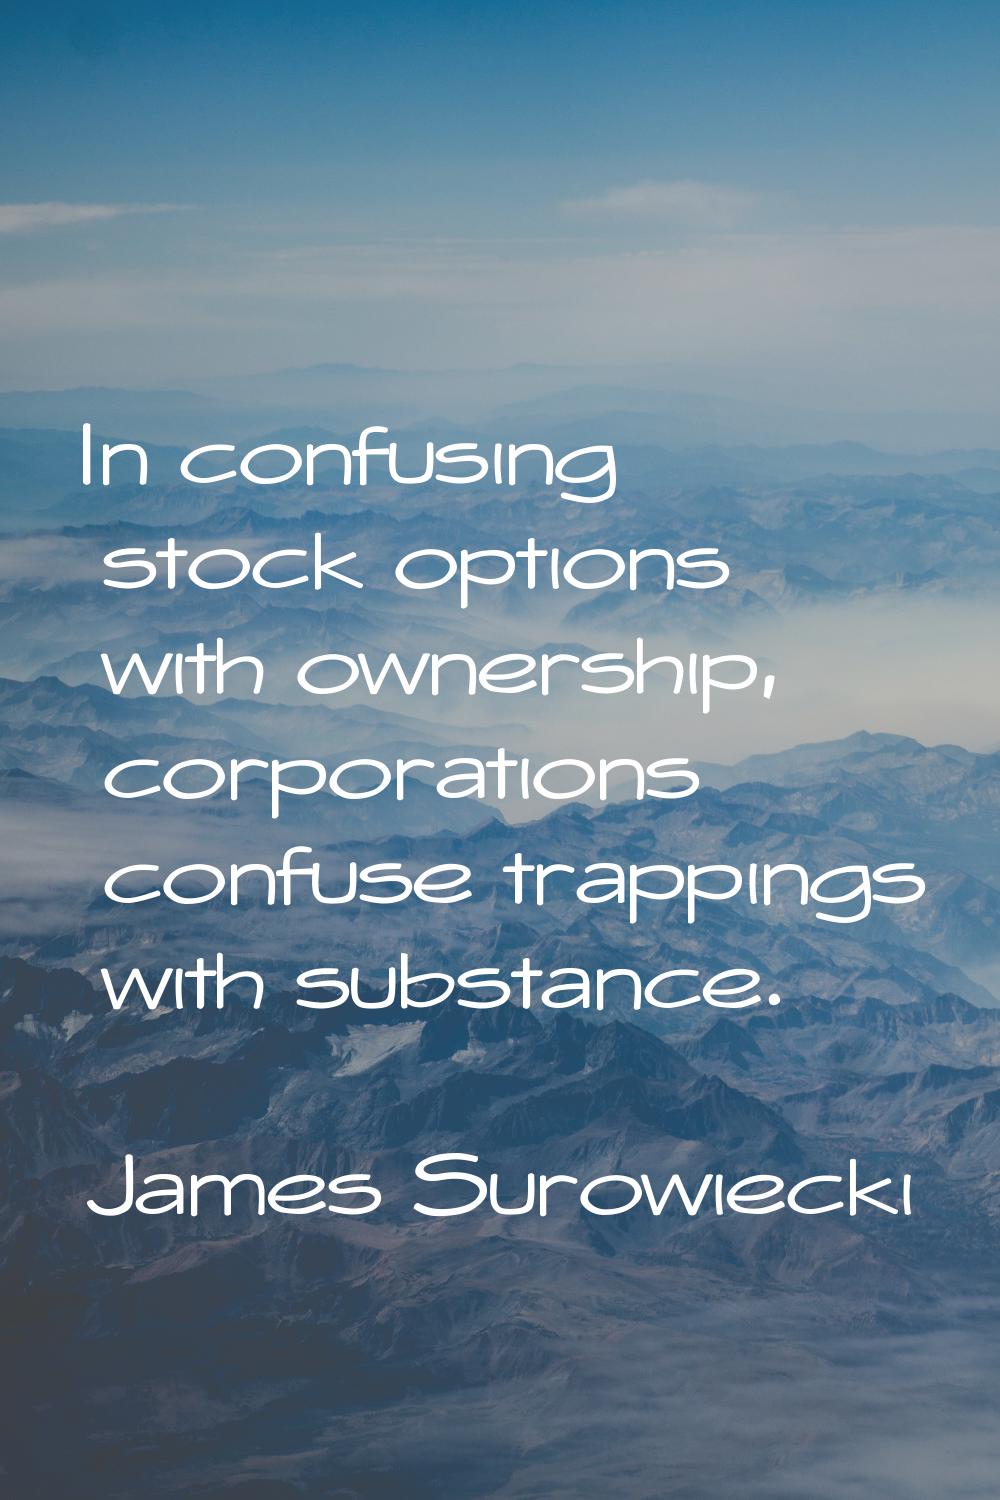 In confusing stock options with ownership, corporations confuse trappings with substance.